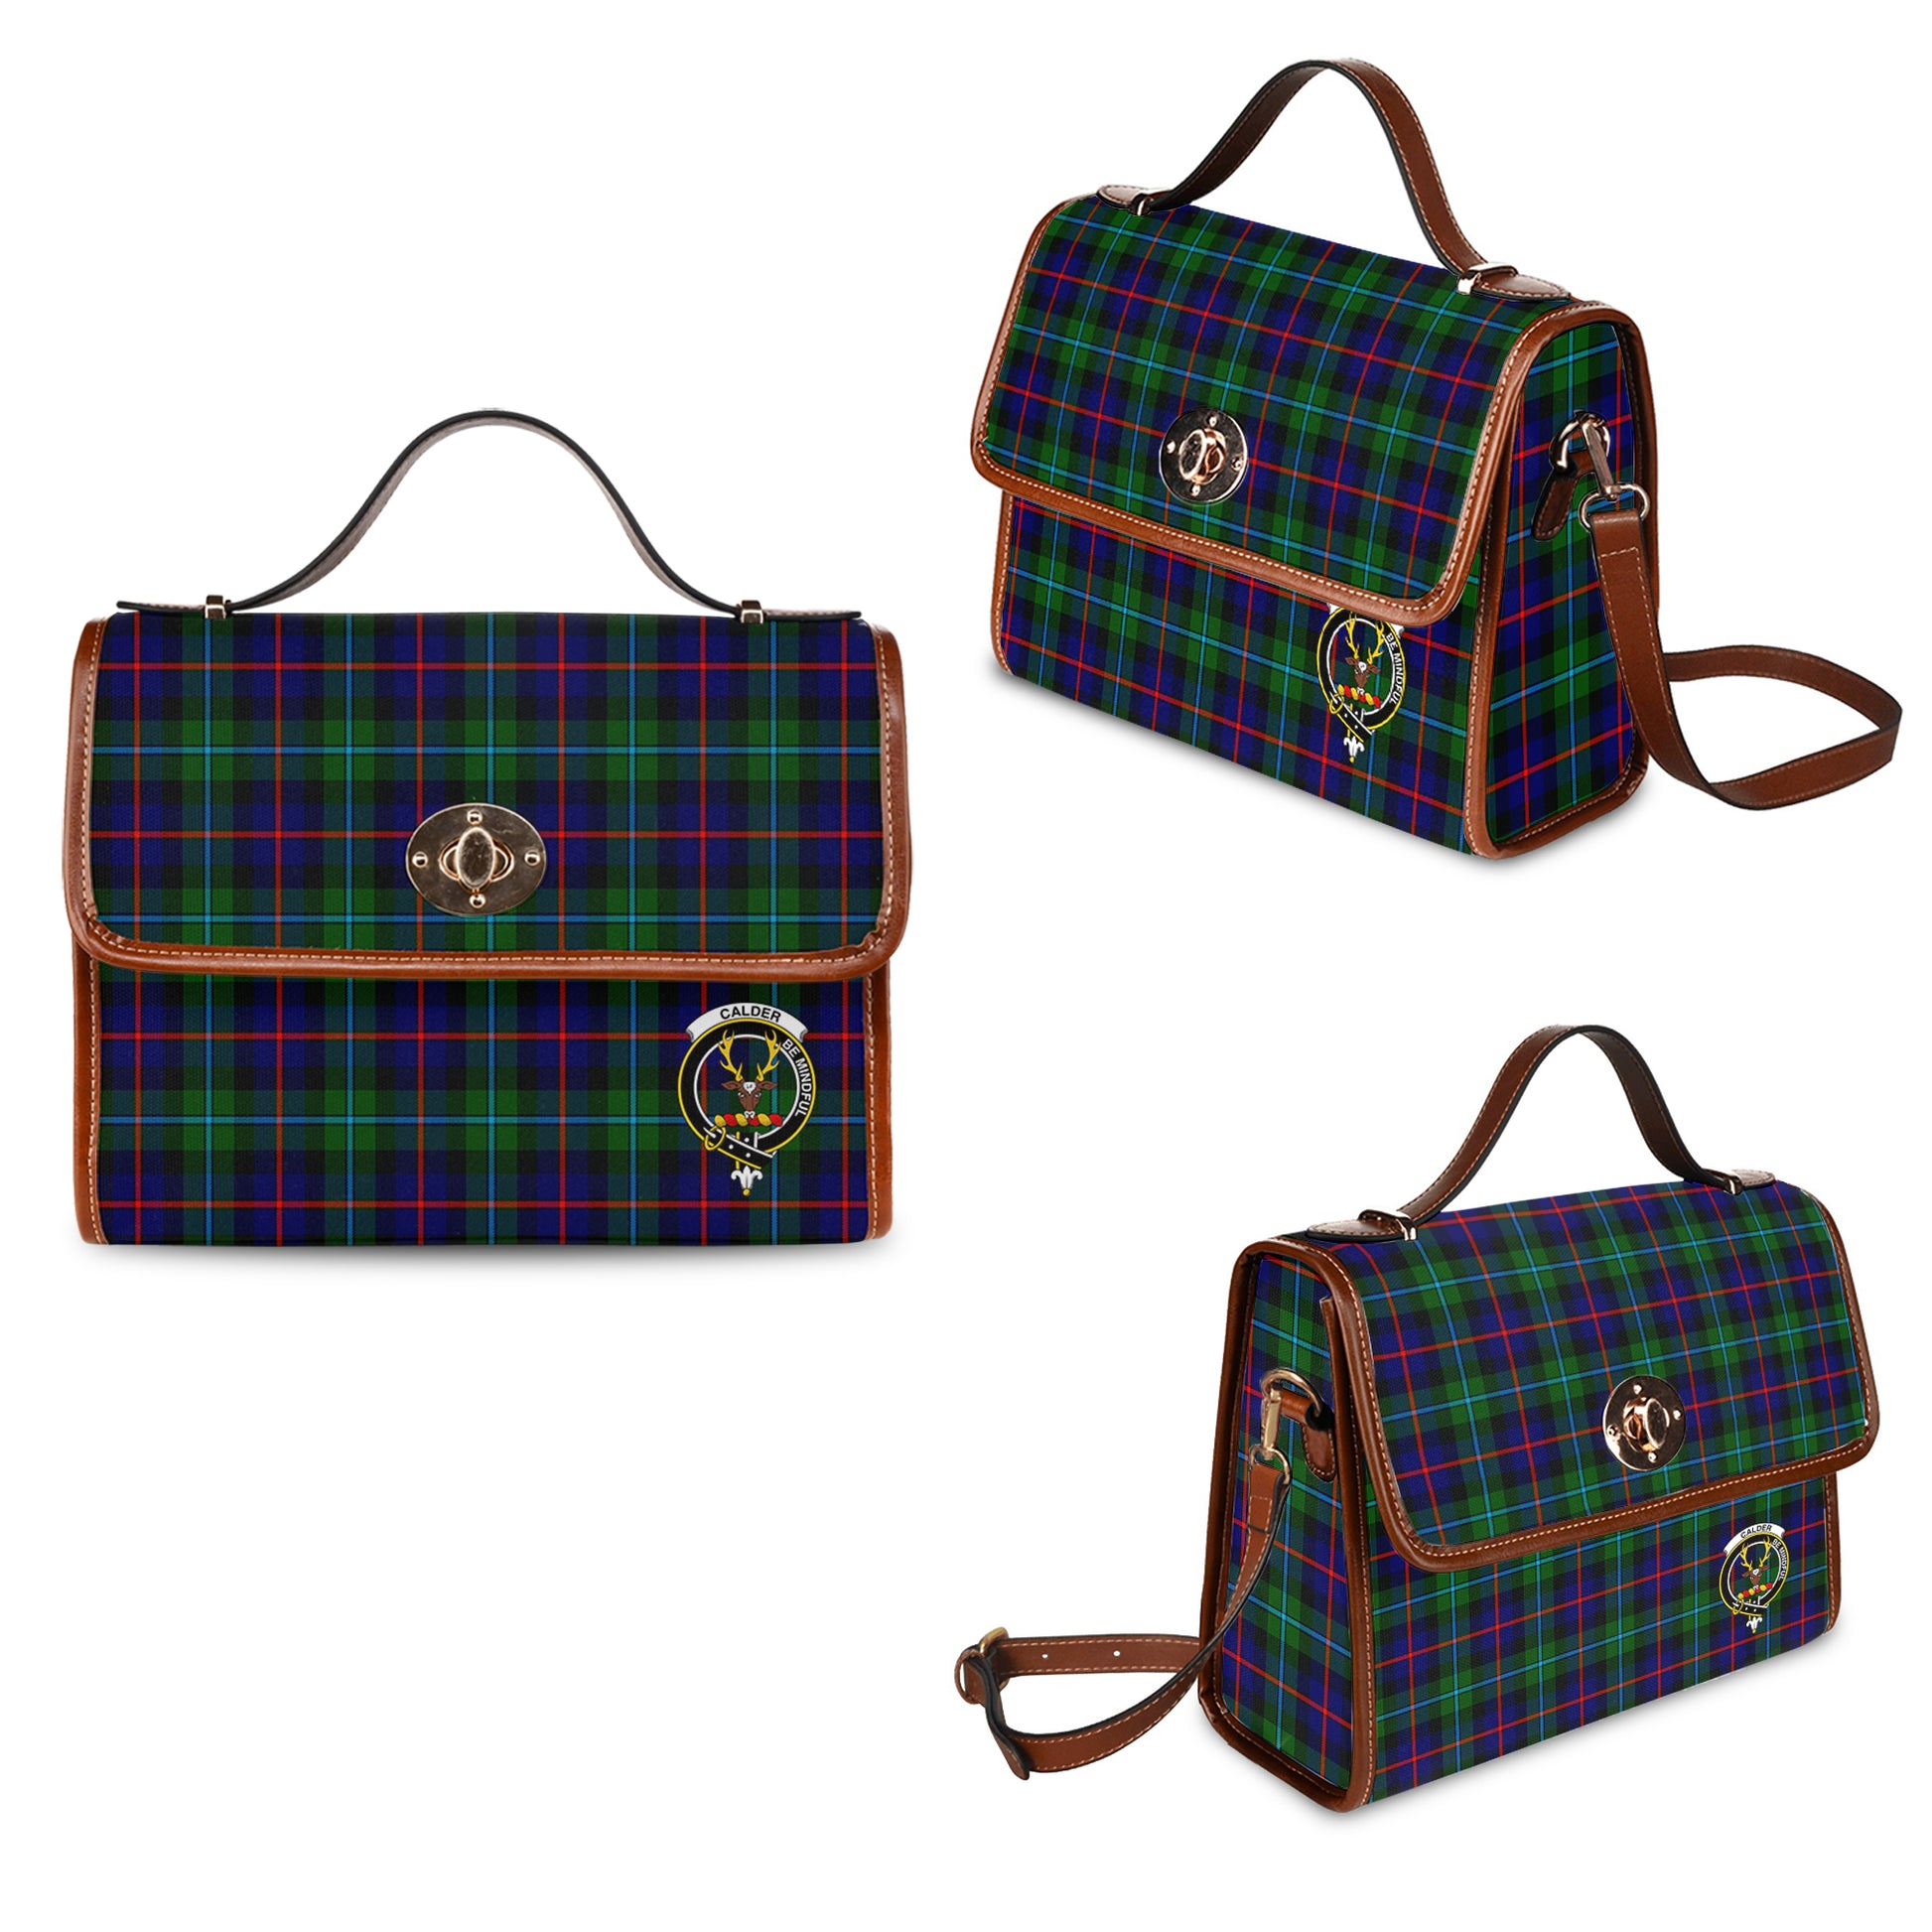 Calder Modern Tartan Leather Strap Waterproof Canvas Bag with Family Crest One Size 34cm * 42cm (13.4" x 16.5")